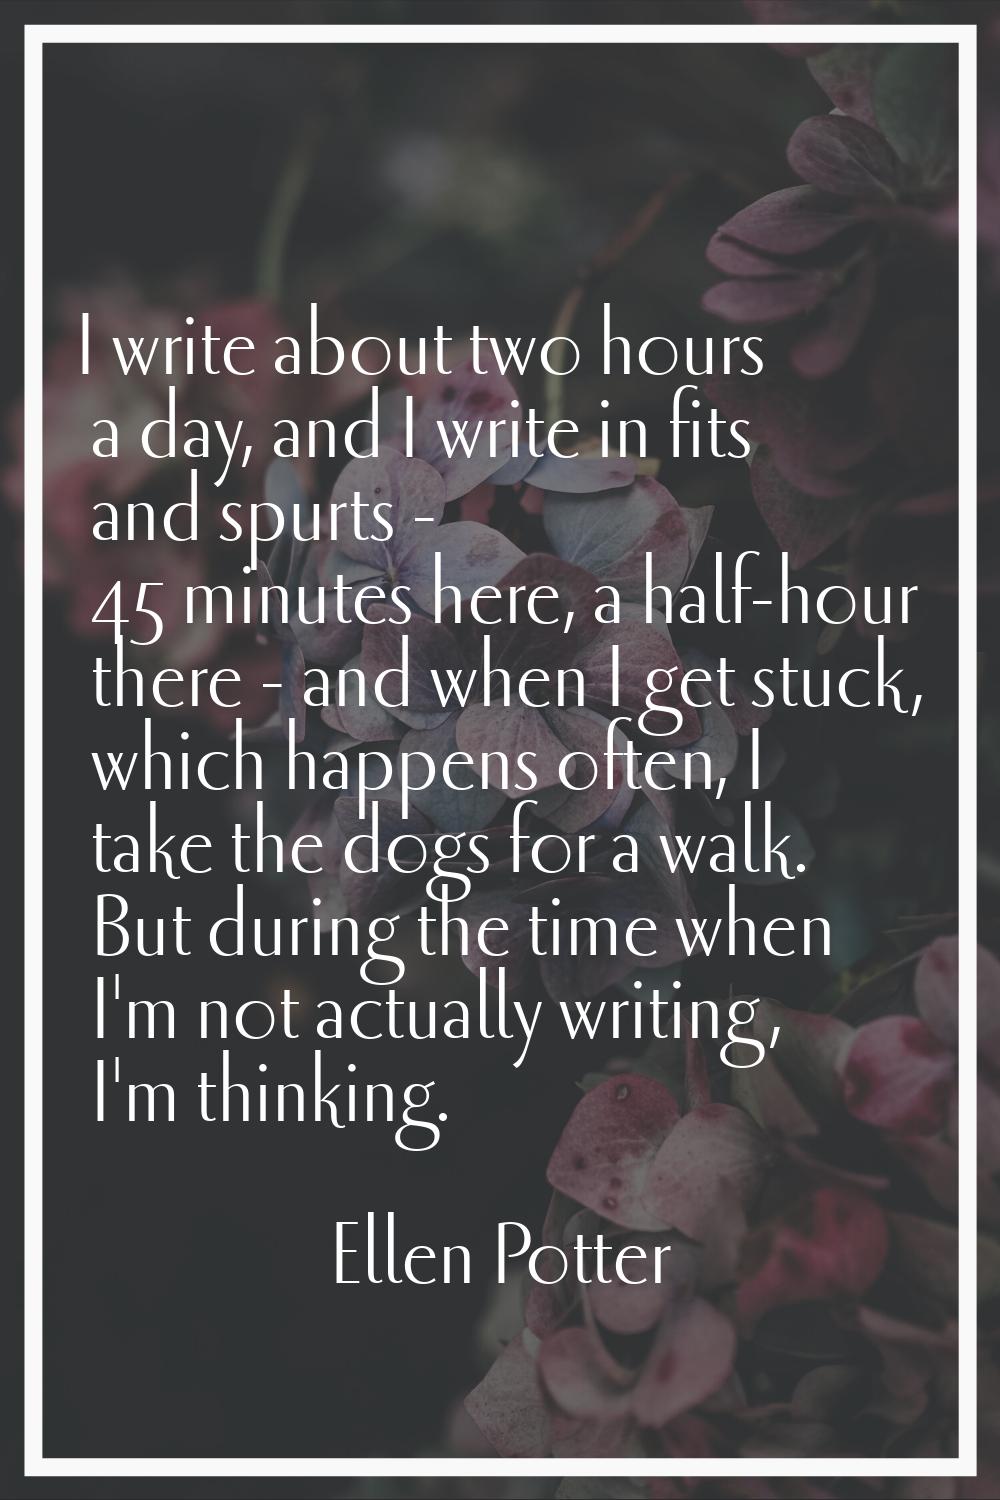 I write about two hours a day, and I write in fits and spurts - 45 minutes here, a half-hour there 